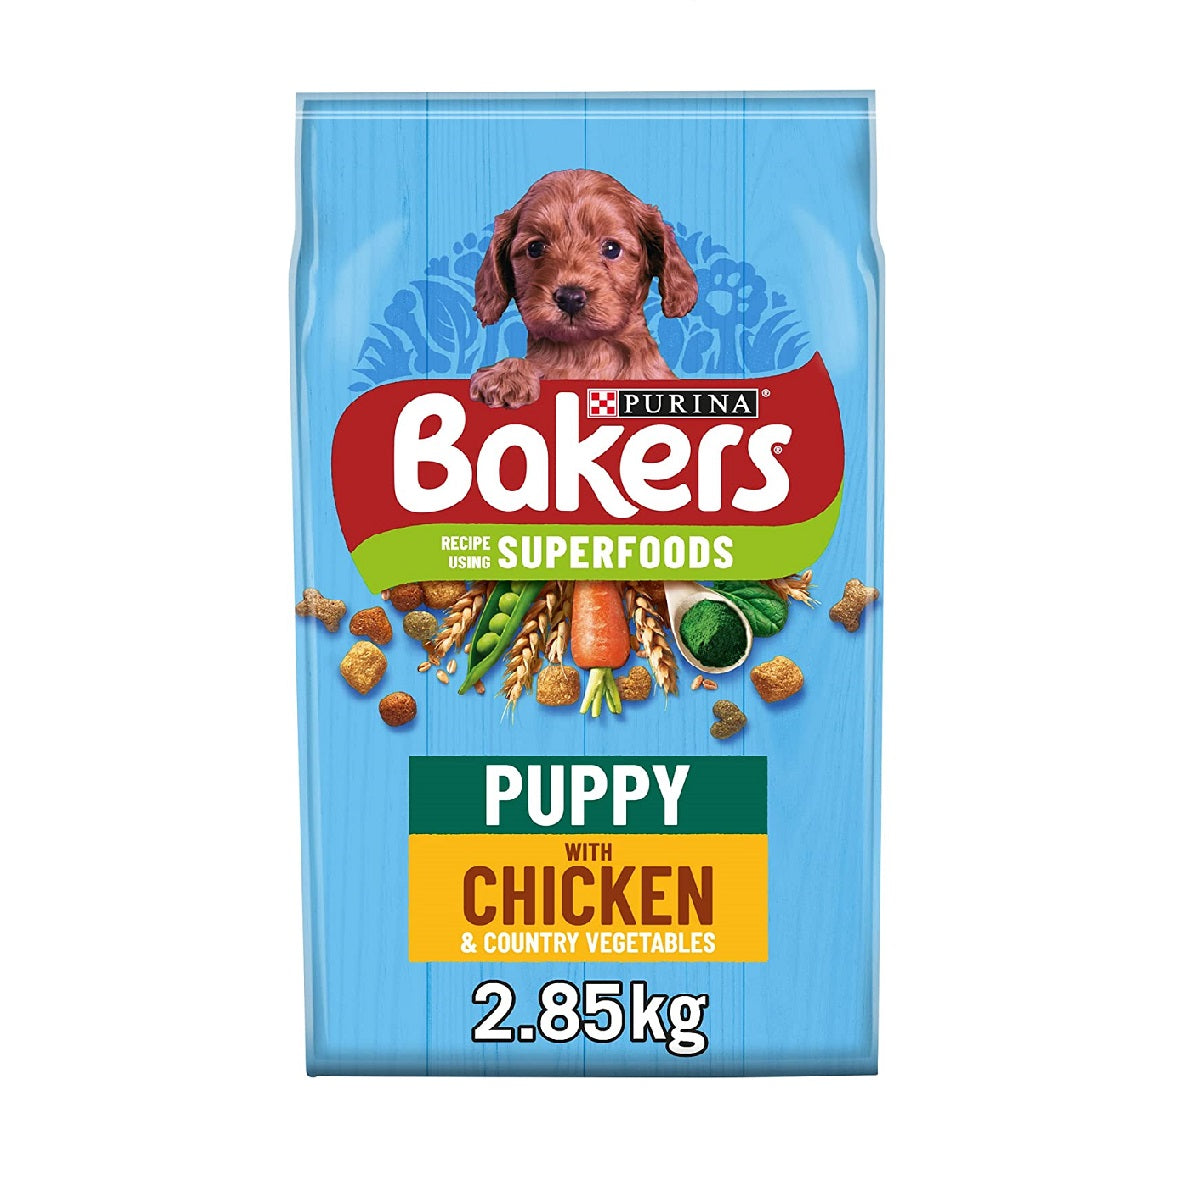 Bakers - Puppy